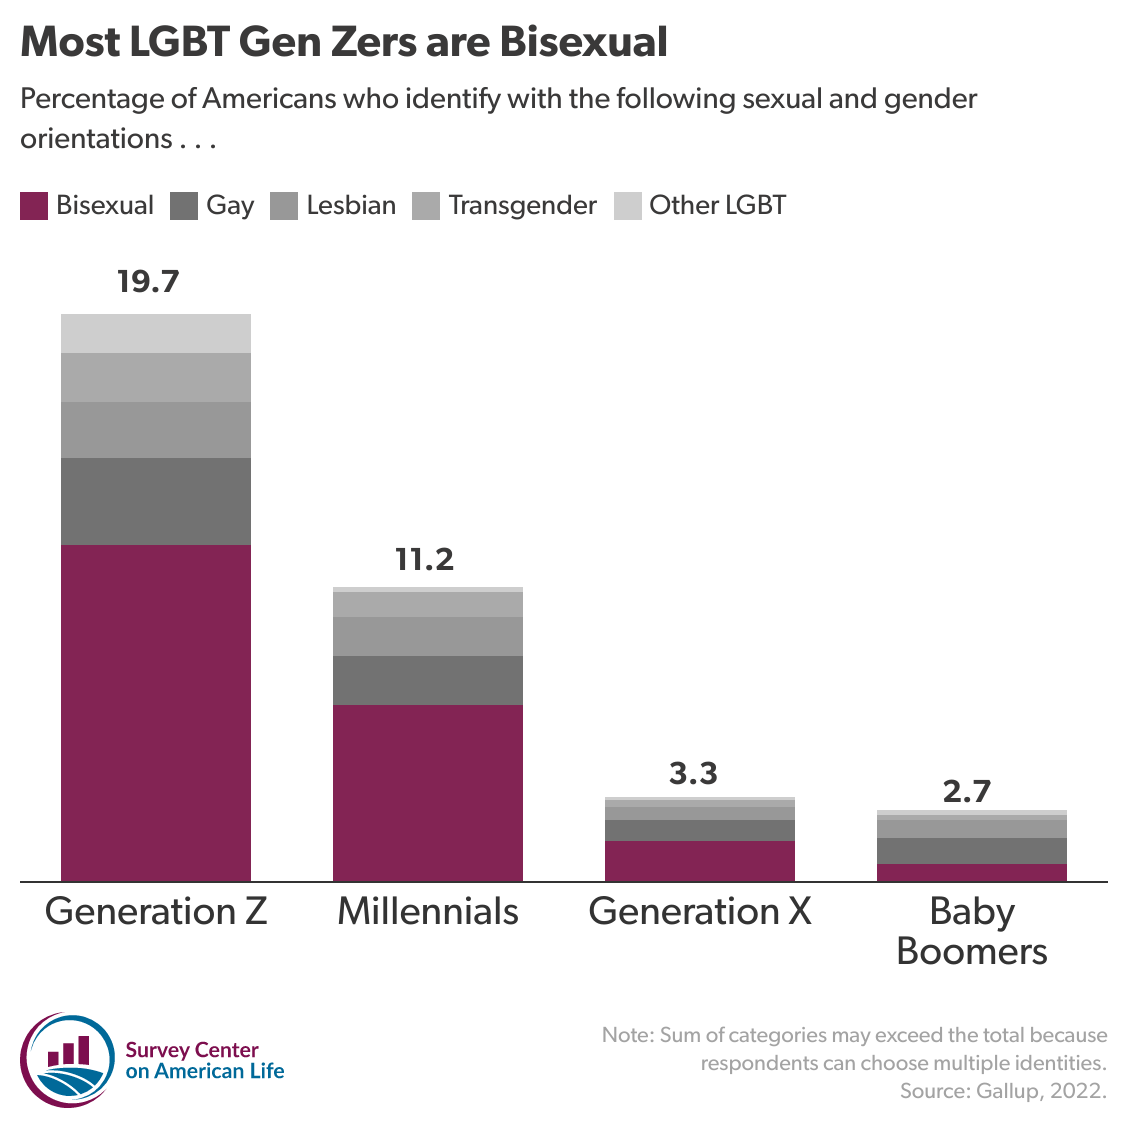 Stacked vertical bar chart showing the percentage of each generation who identify as LGTB